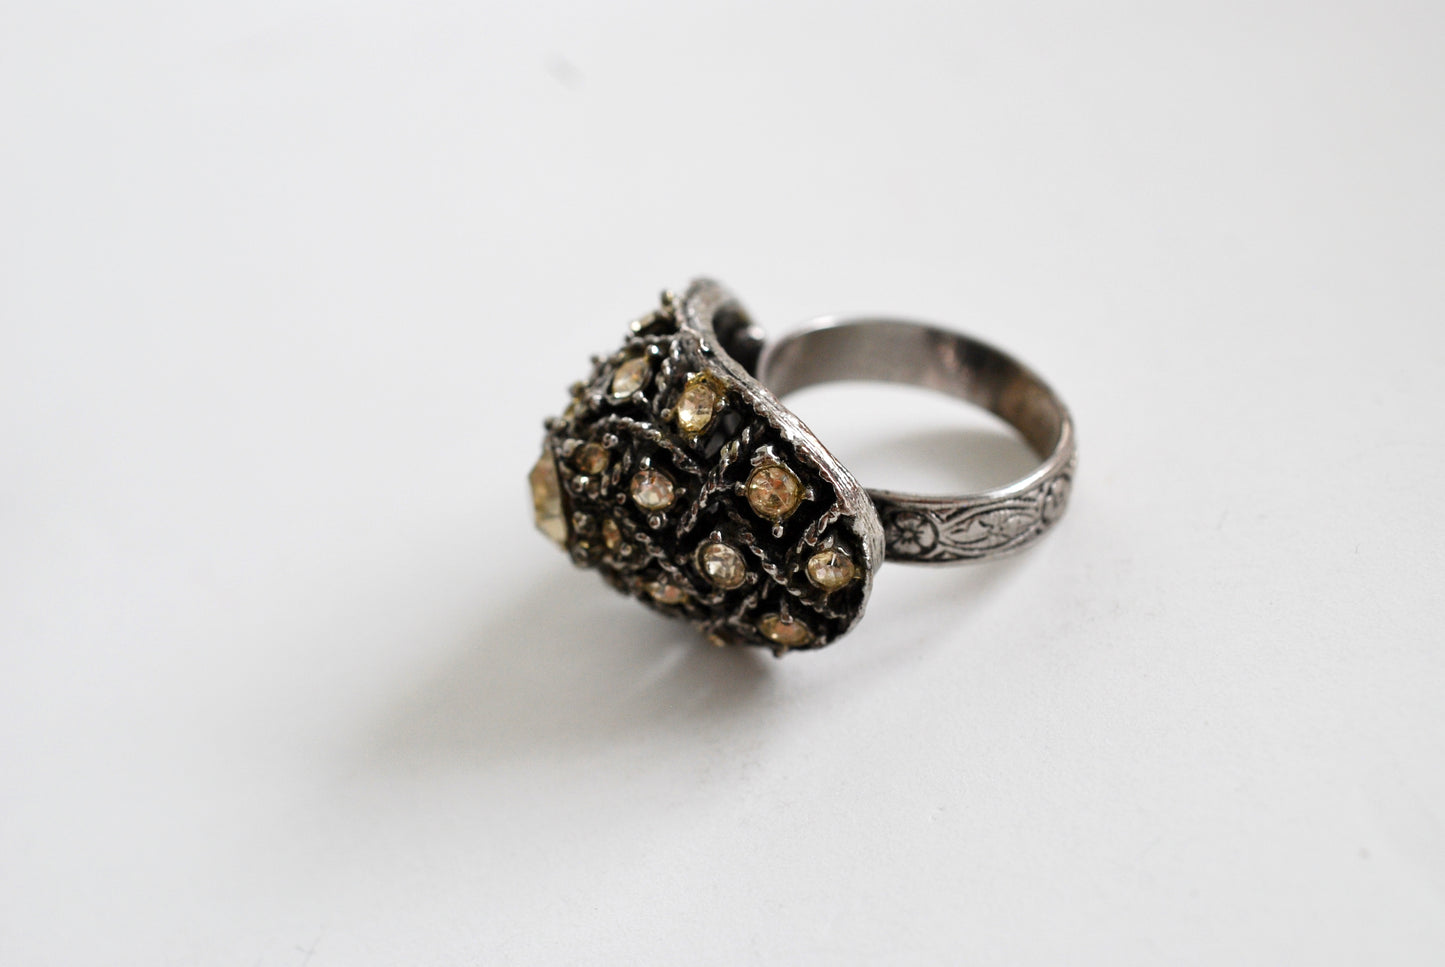 Vintage 1960's Large Domed Cocktail Ring Silver tone with Rhinestones Adjustable